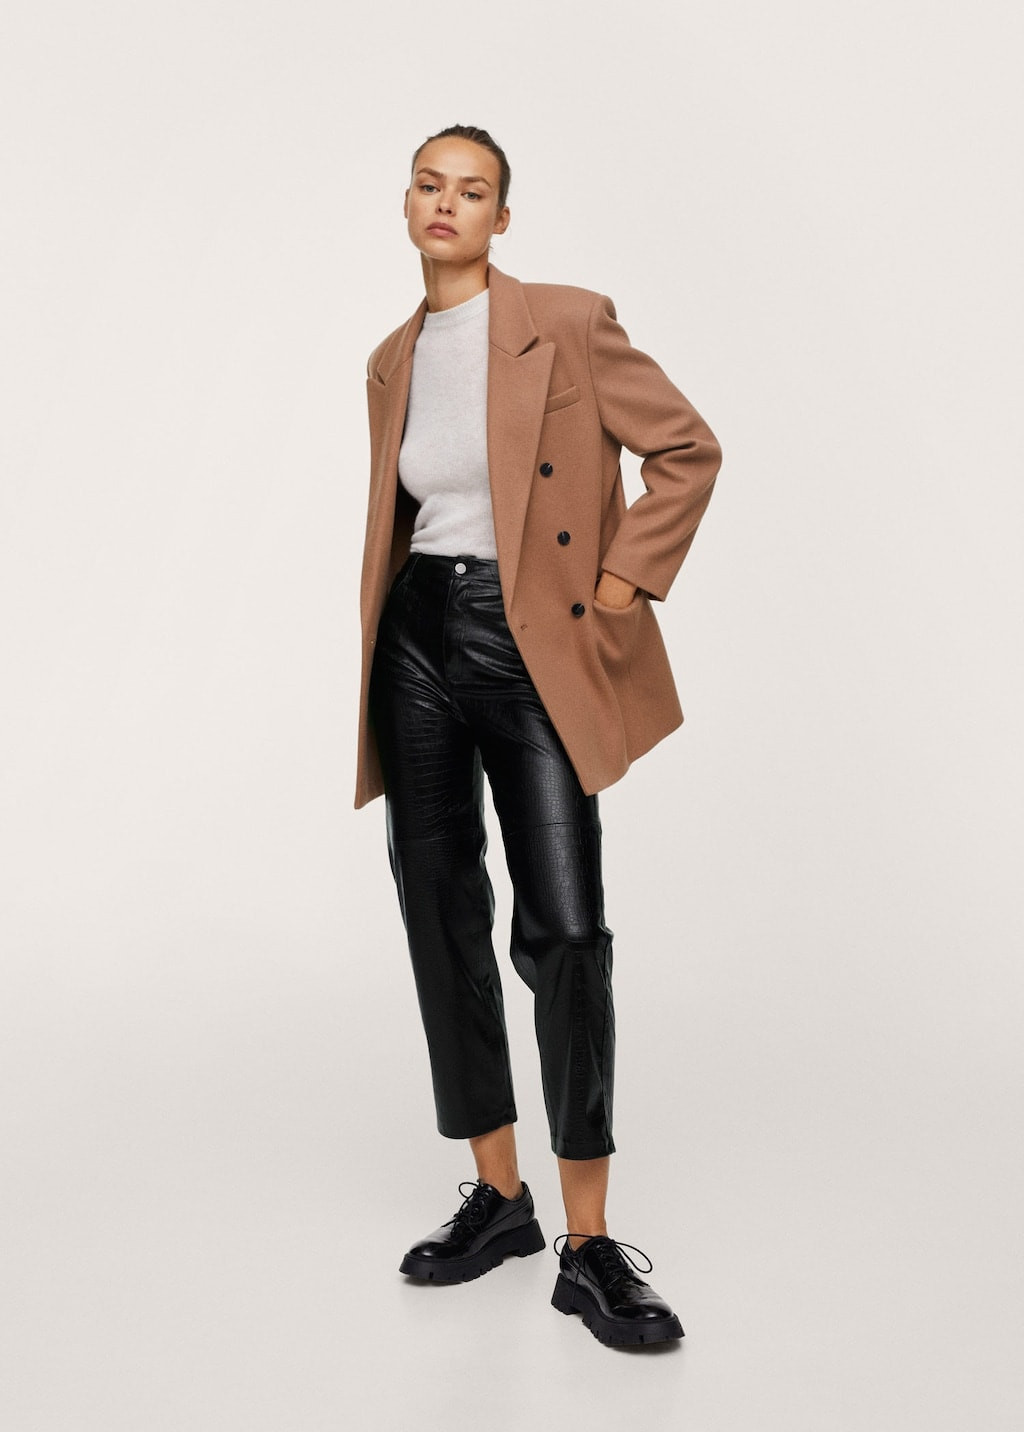 What to Wear With Leather Pants - 18 Outfits Ideas